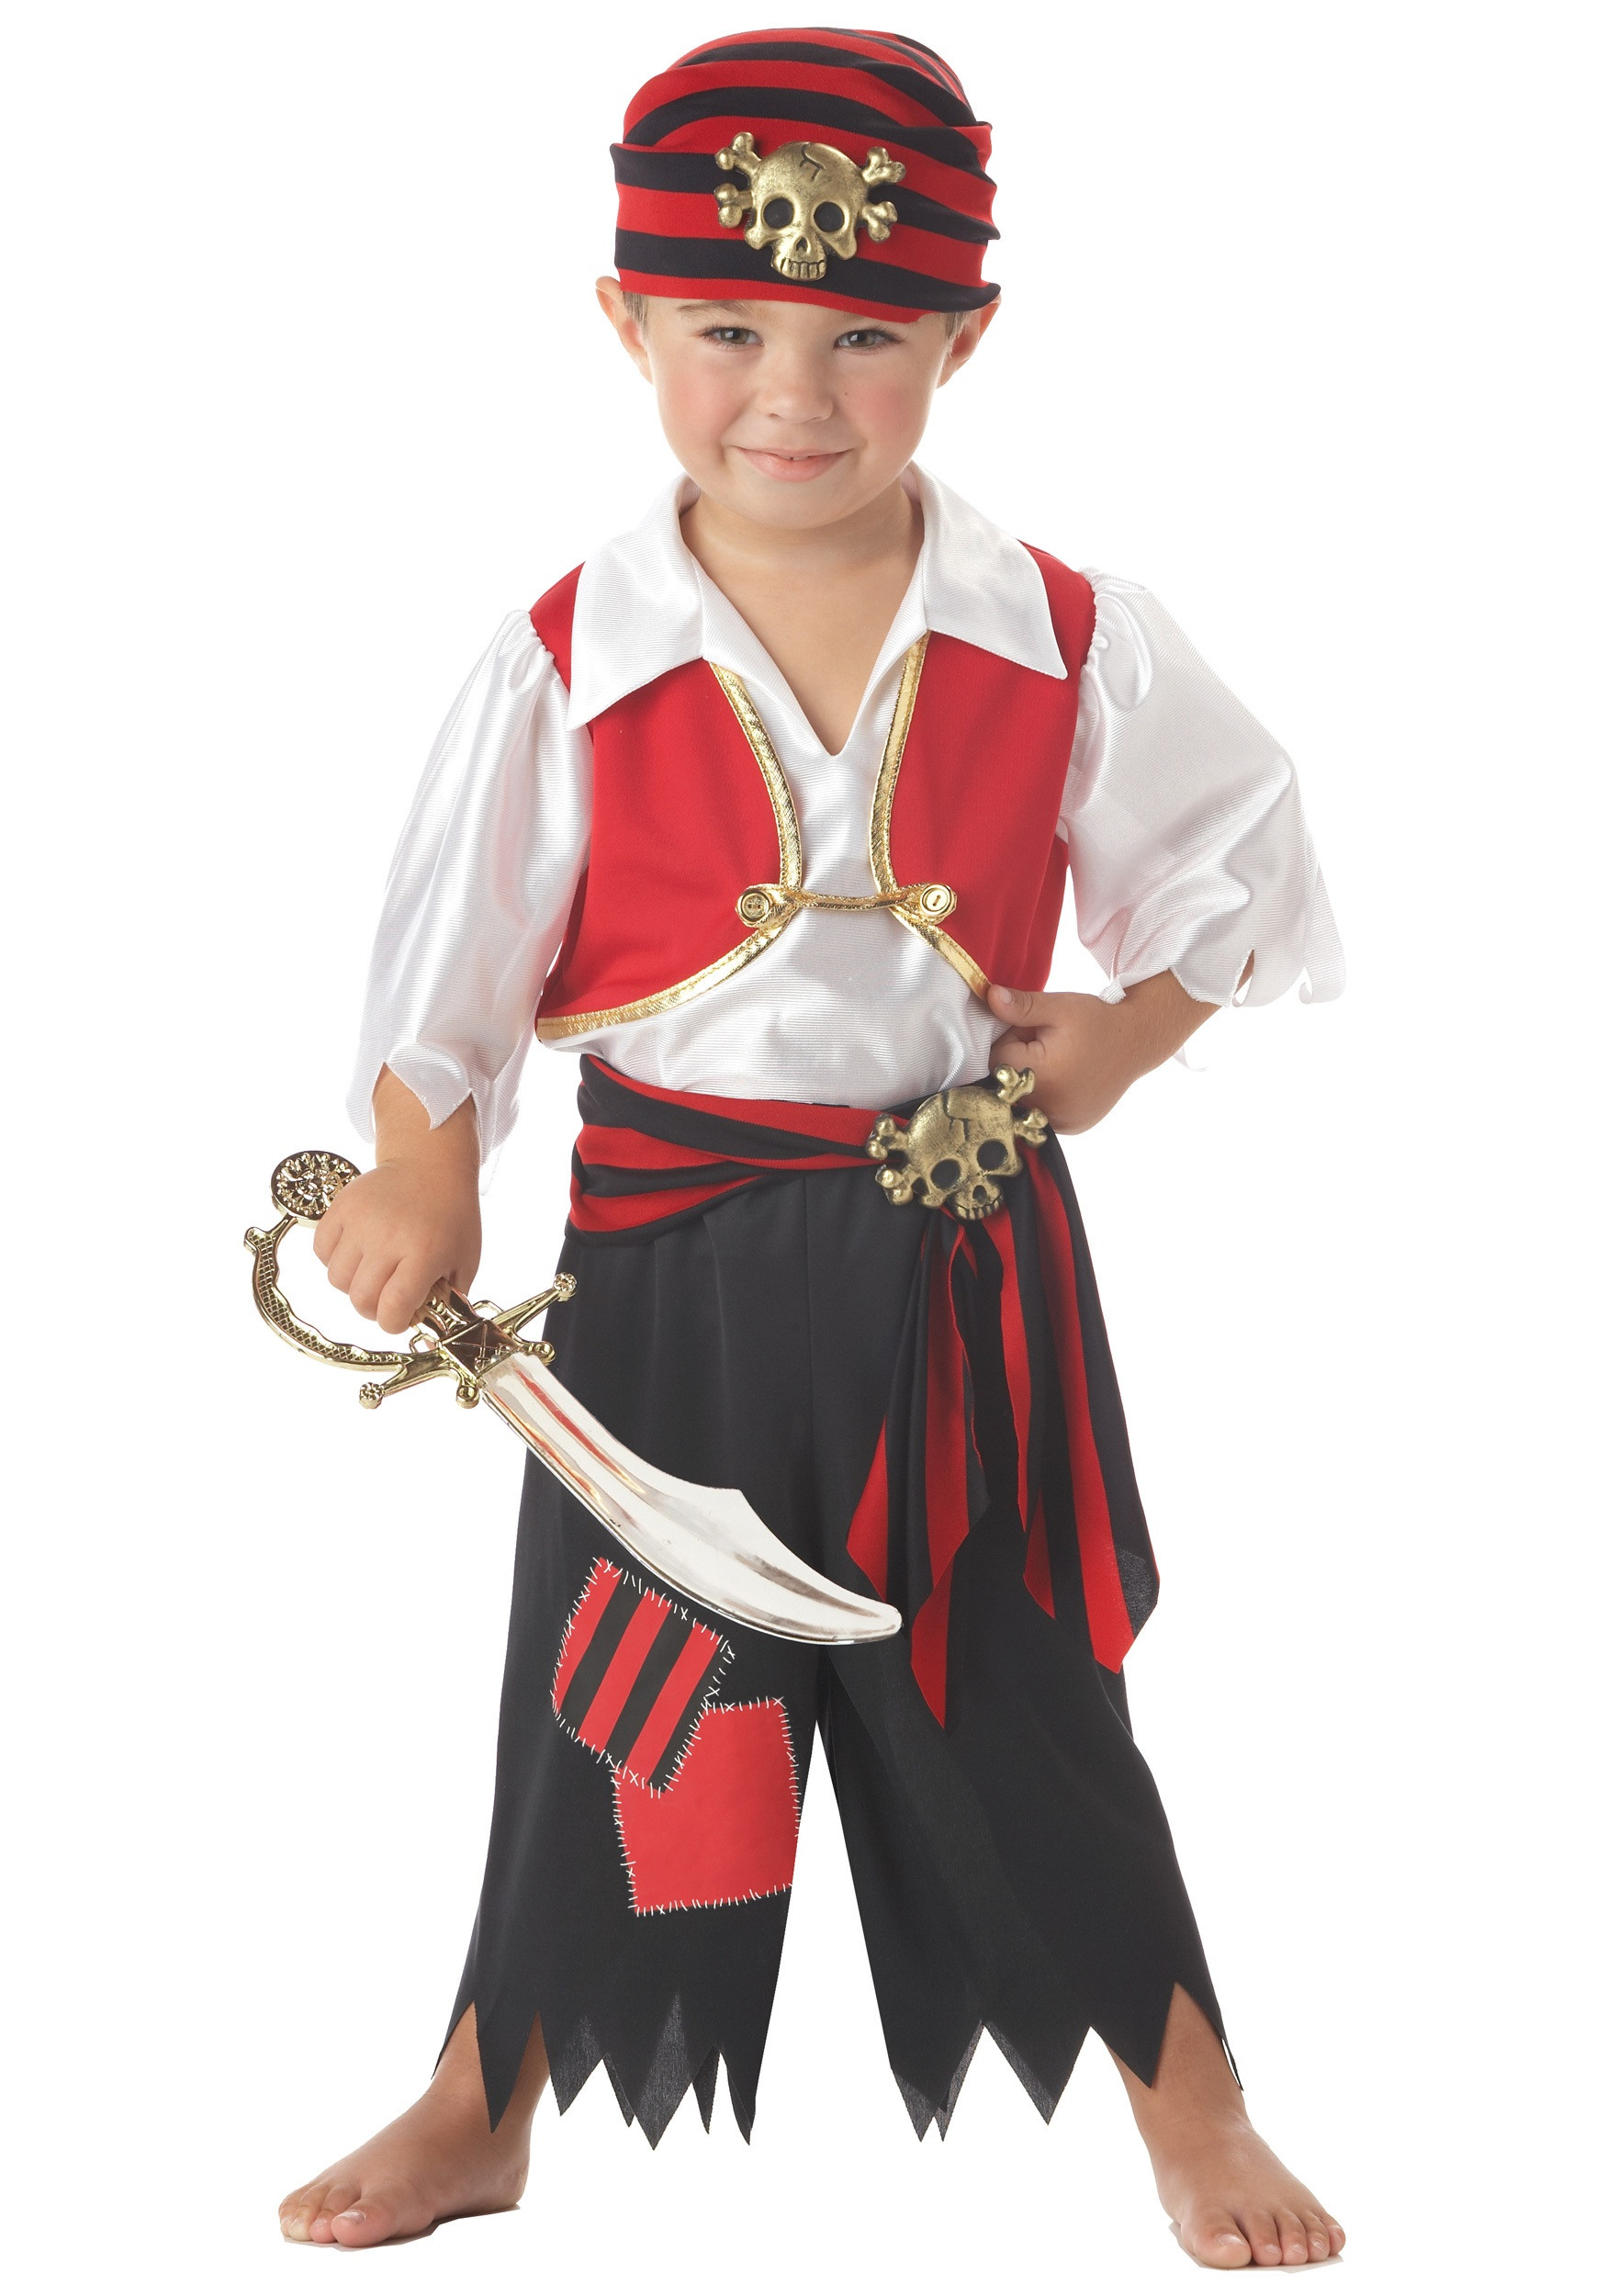 DIY Pirate Costume For Toddler
 Toddler Ahoy Matey Pirate Costume